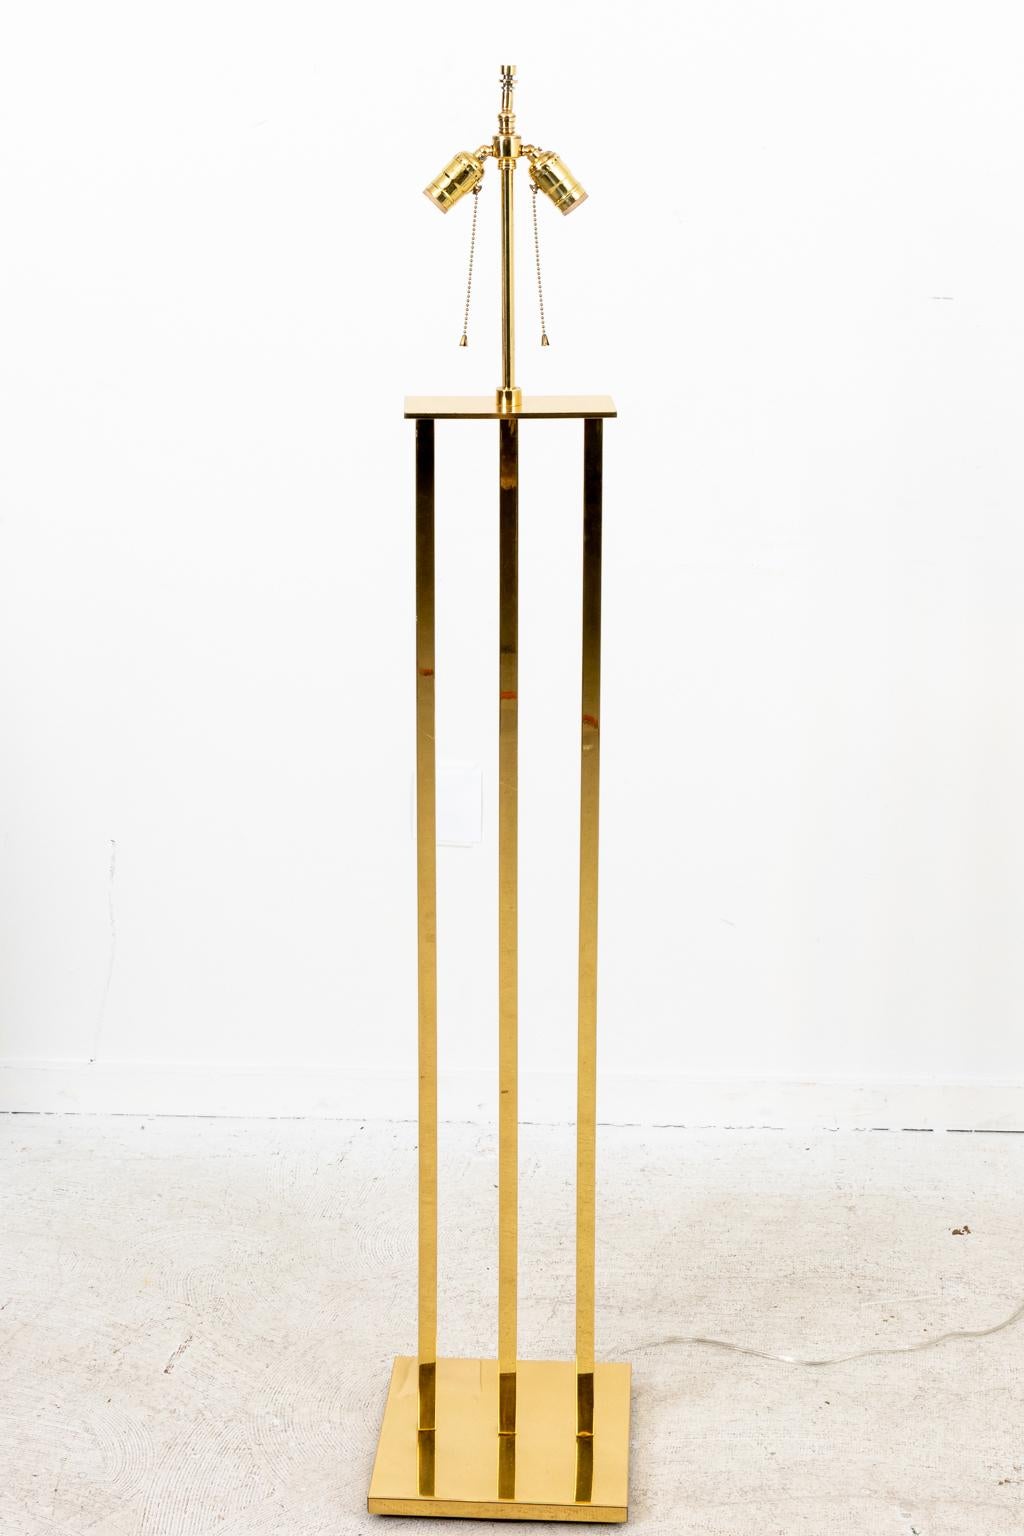 Circa 1970s Mid-Century Modern brass three tiered column floor lamp with double socket on a square base. Made in the United States. Please note of wear consistent with age including one small pin point dent to base and a few minor scratches.